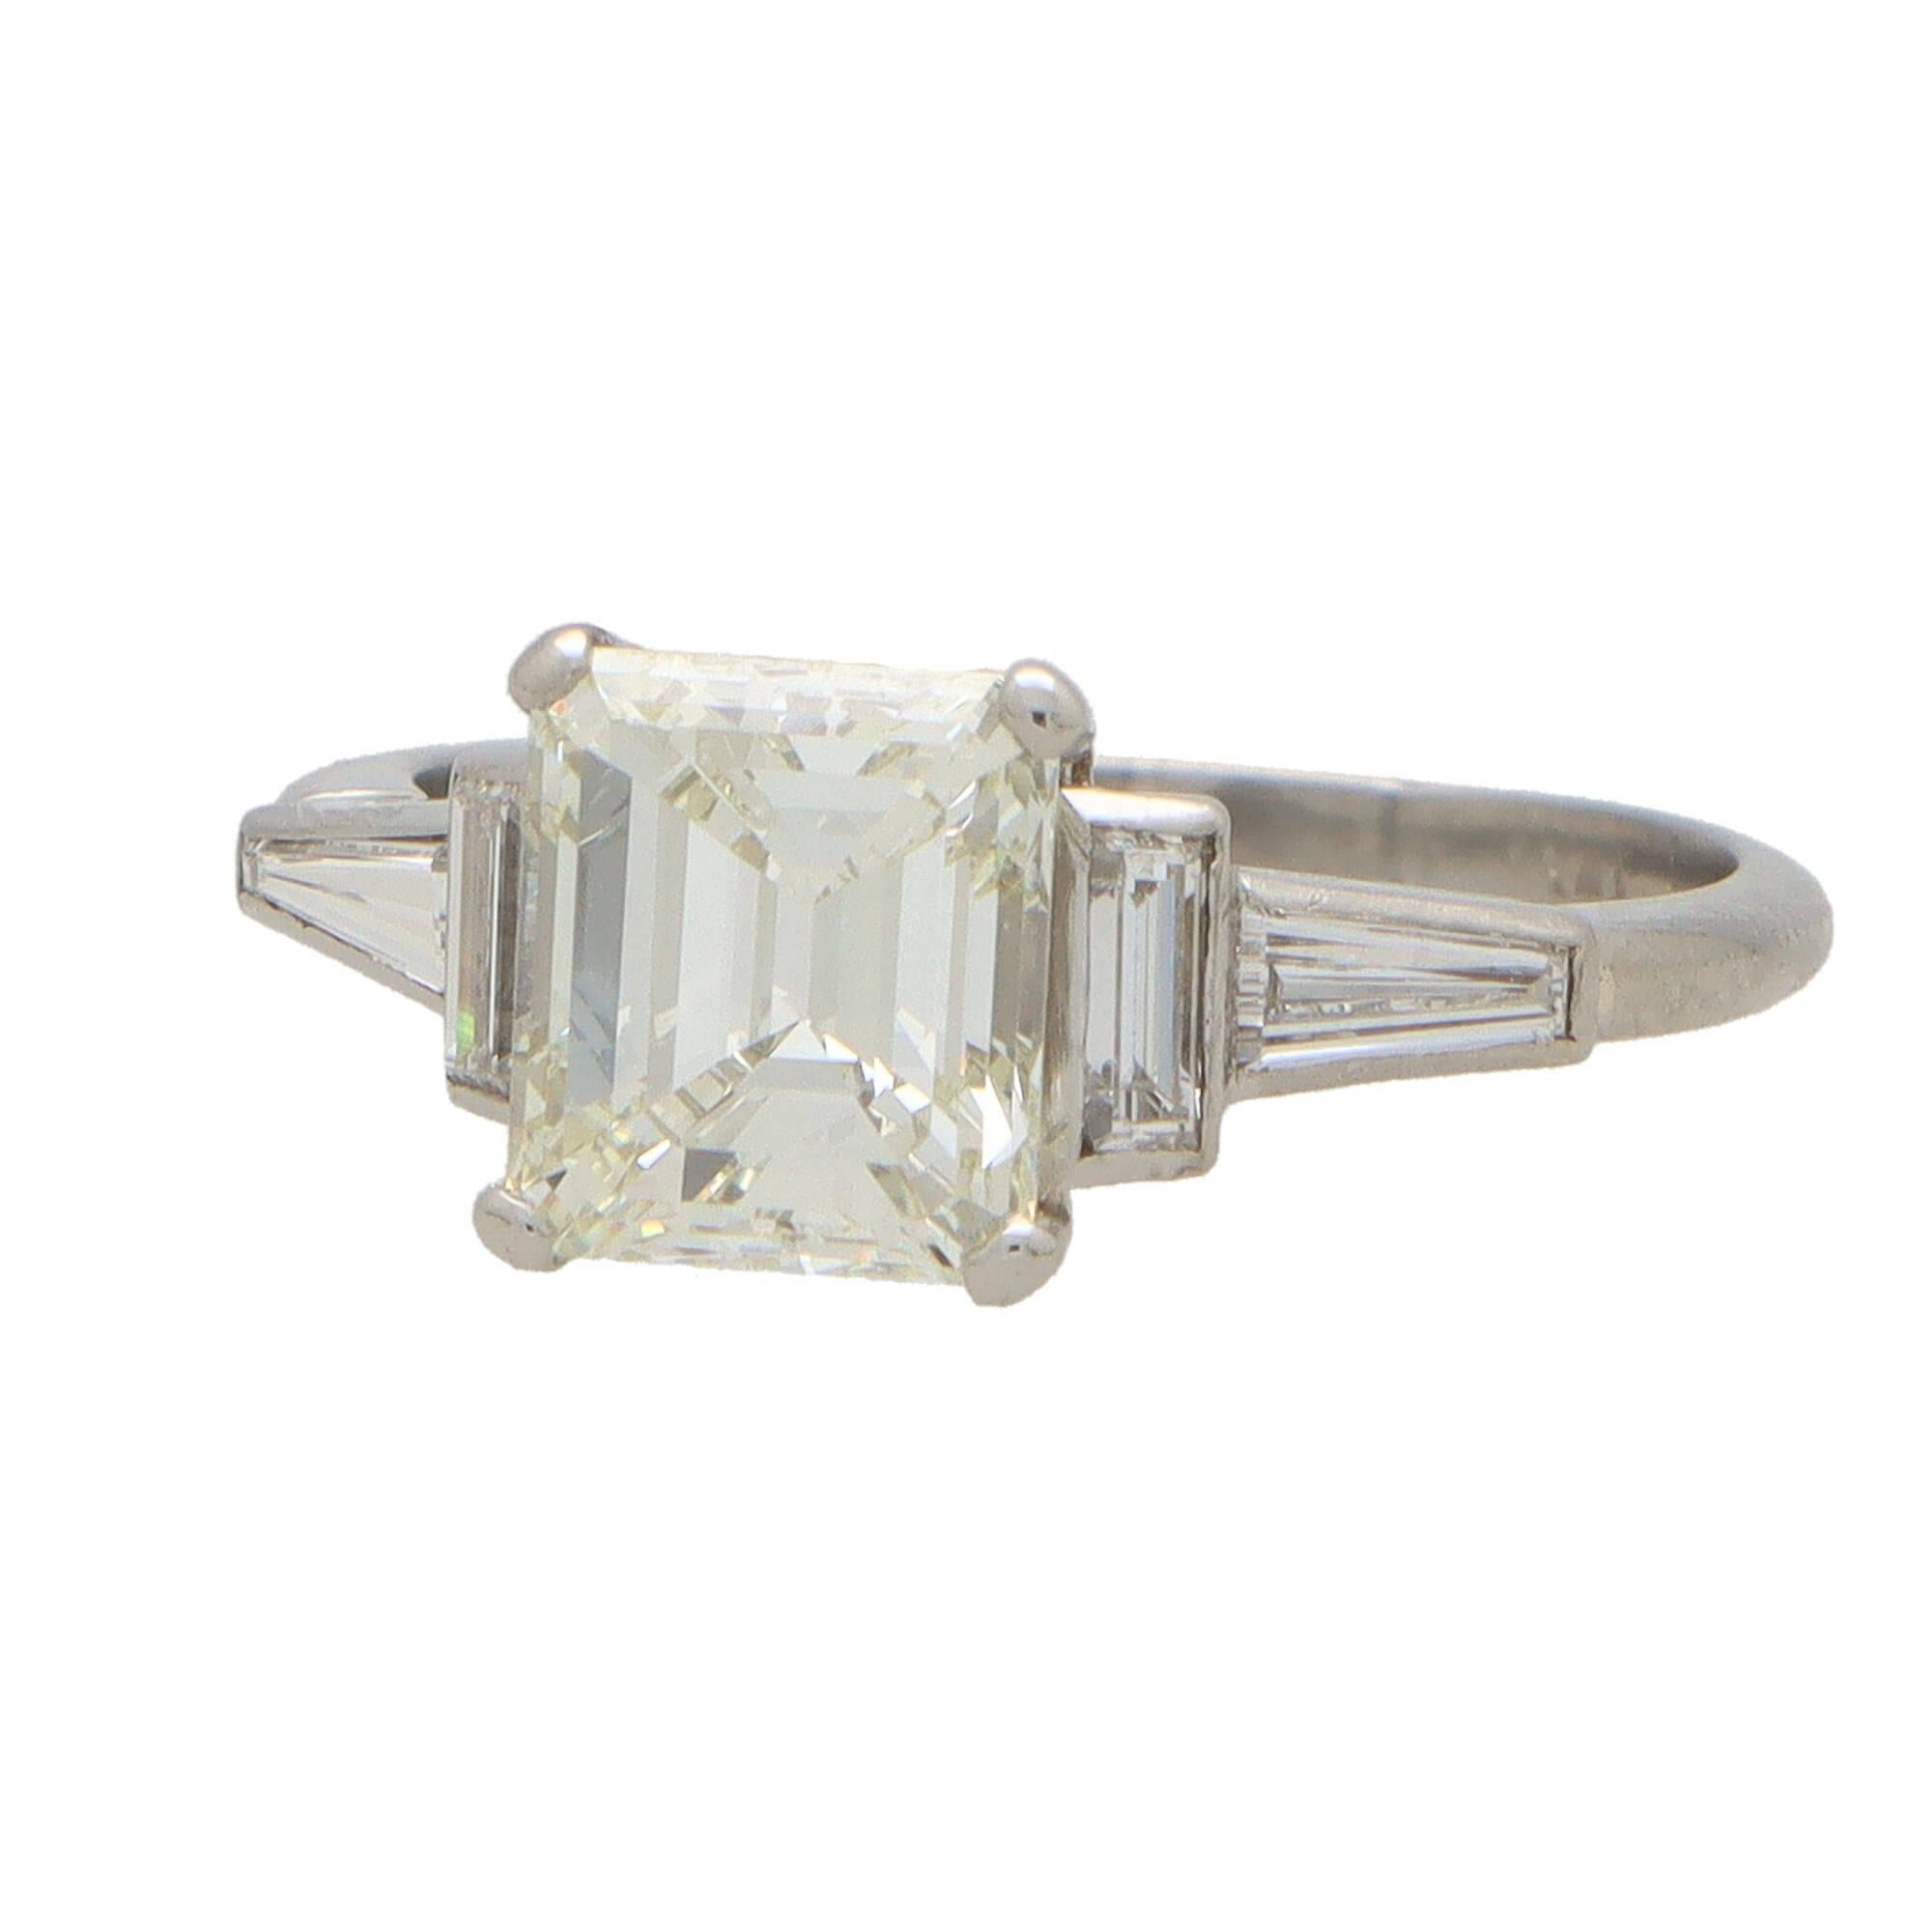 A beautiful Art Deco inspired GIA certified emerald cut diamond ring set in platinum.

The ring is centrally set with a sparkly GIA certified 2.20 carat emerald cut diamond which is securely claw set to centre. The shoulders of the ring are composed